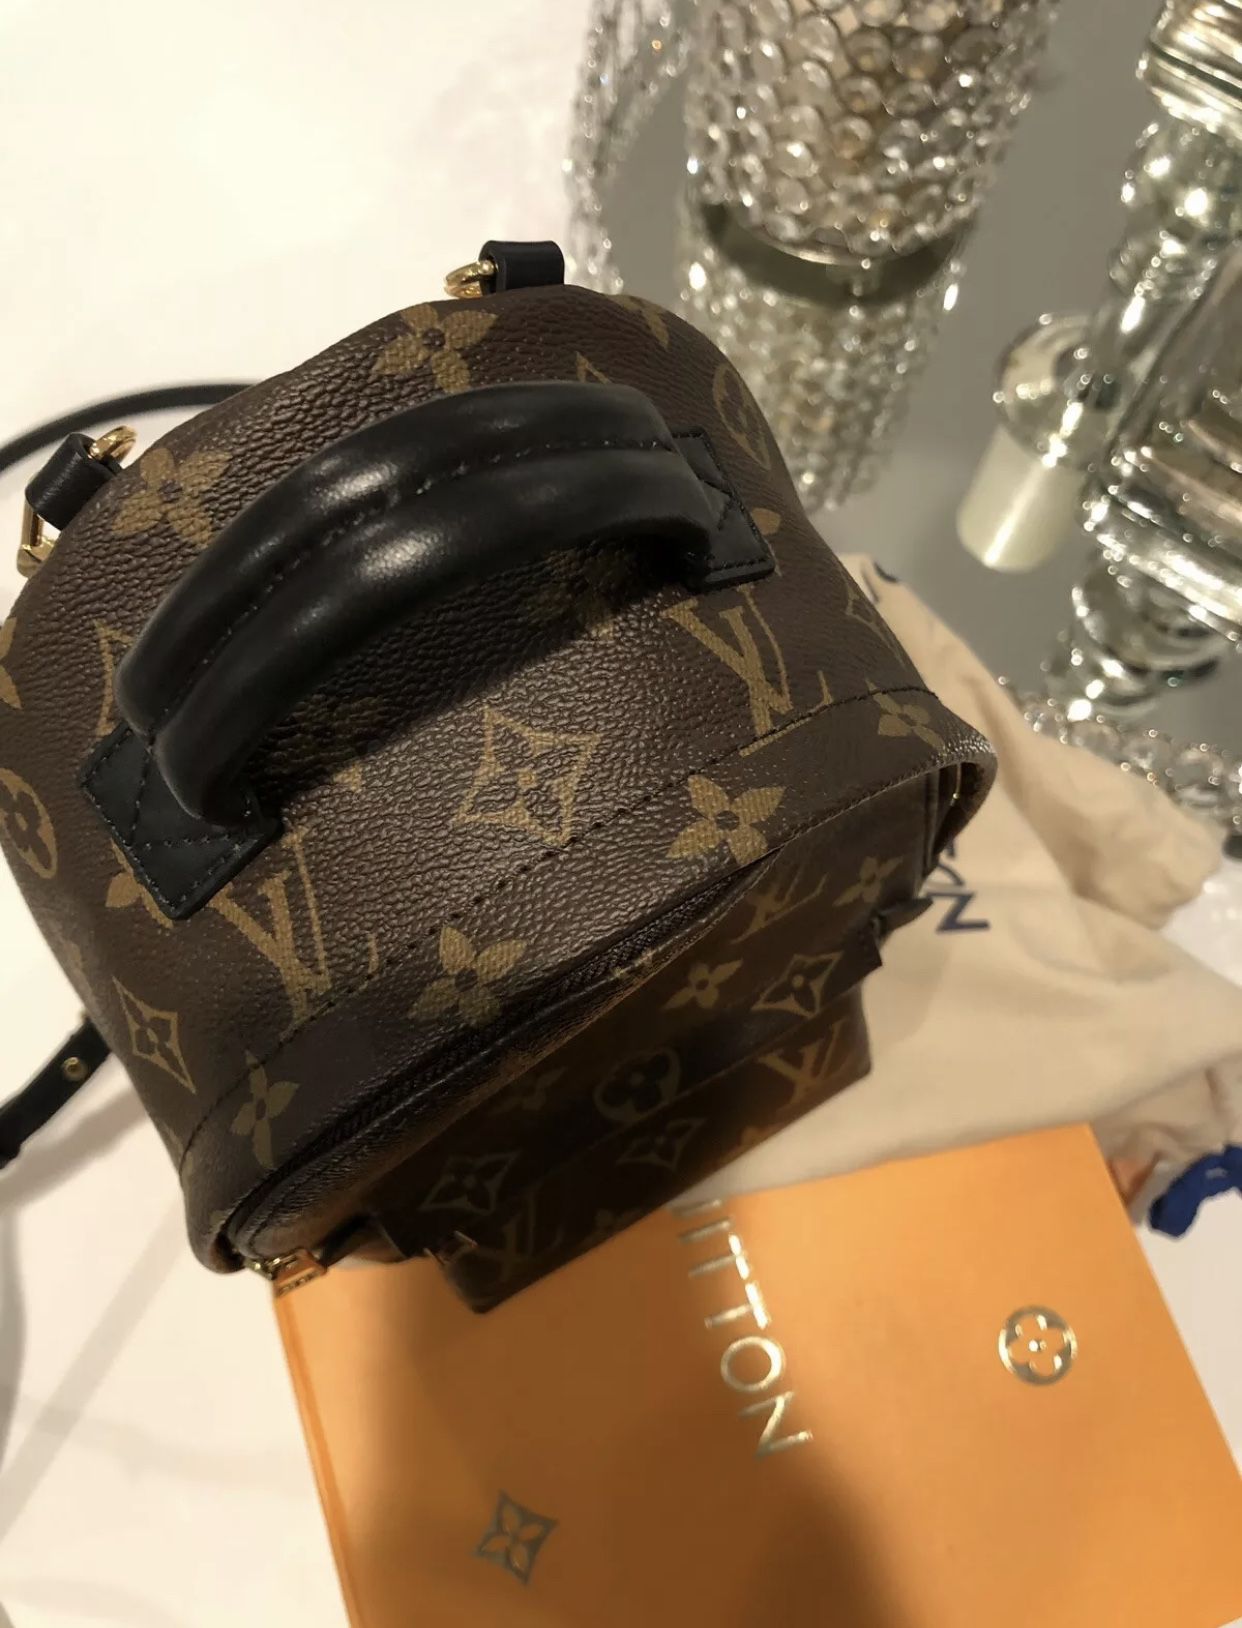 Louis Vuitton Palm Spring Pm Backpack for Sale in Manteca, CA - OfferUp